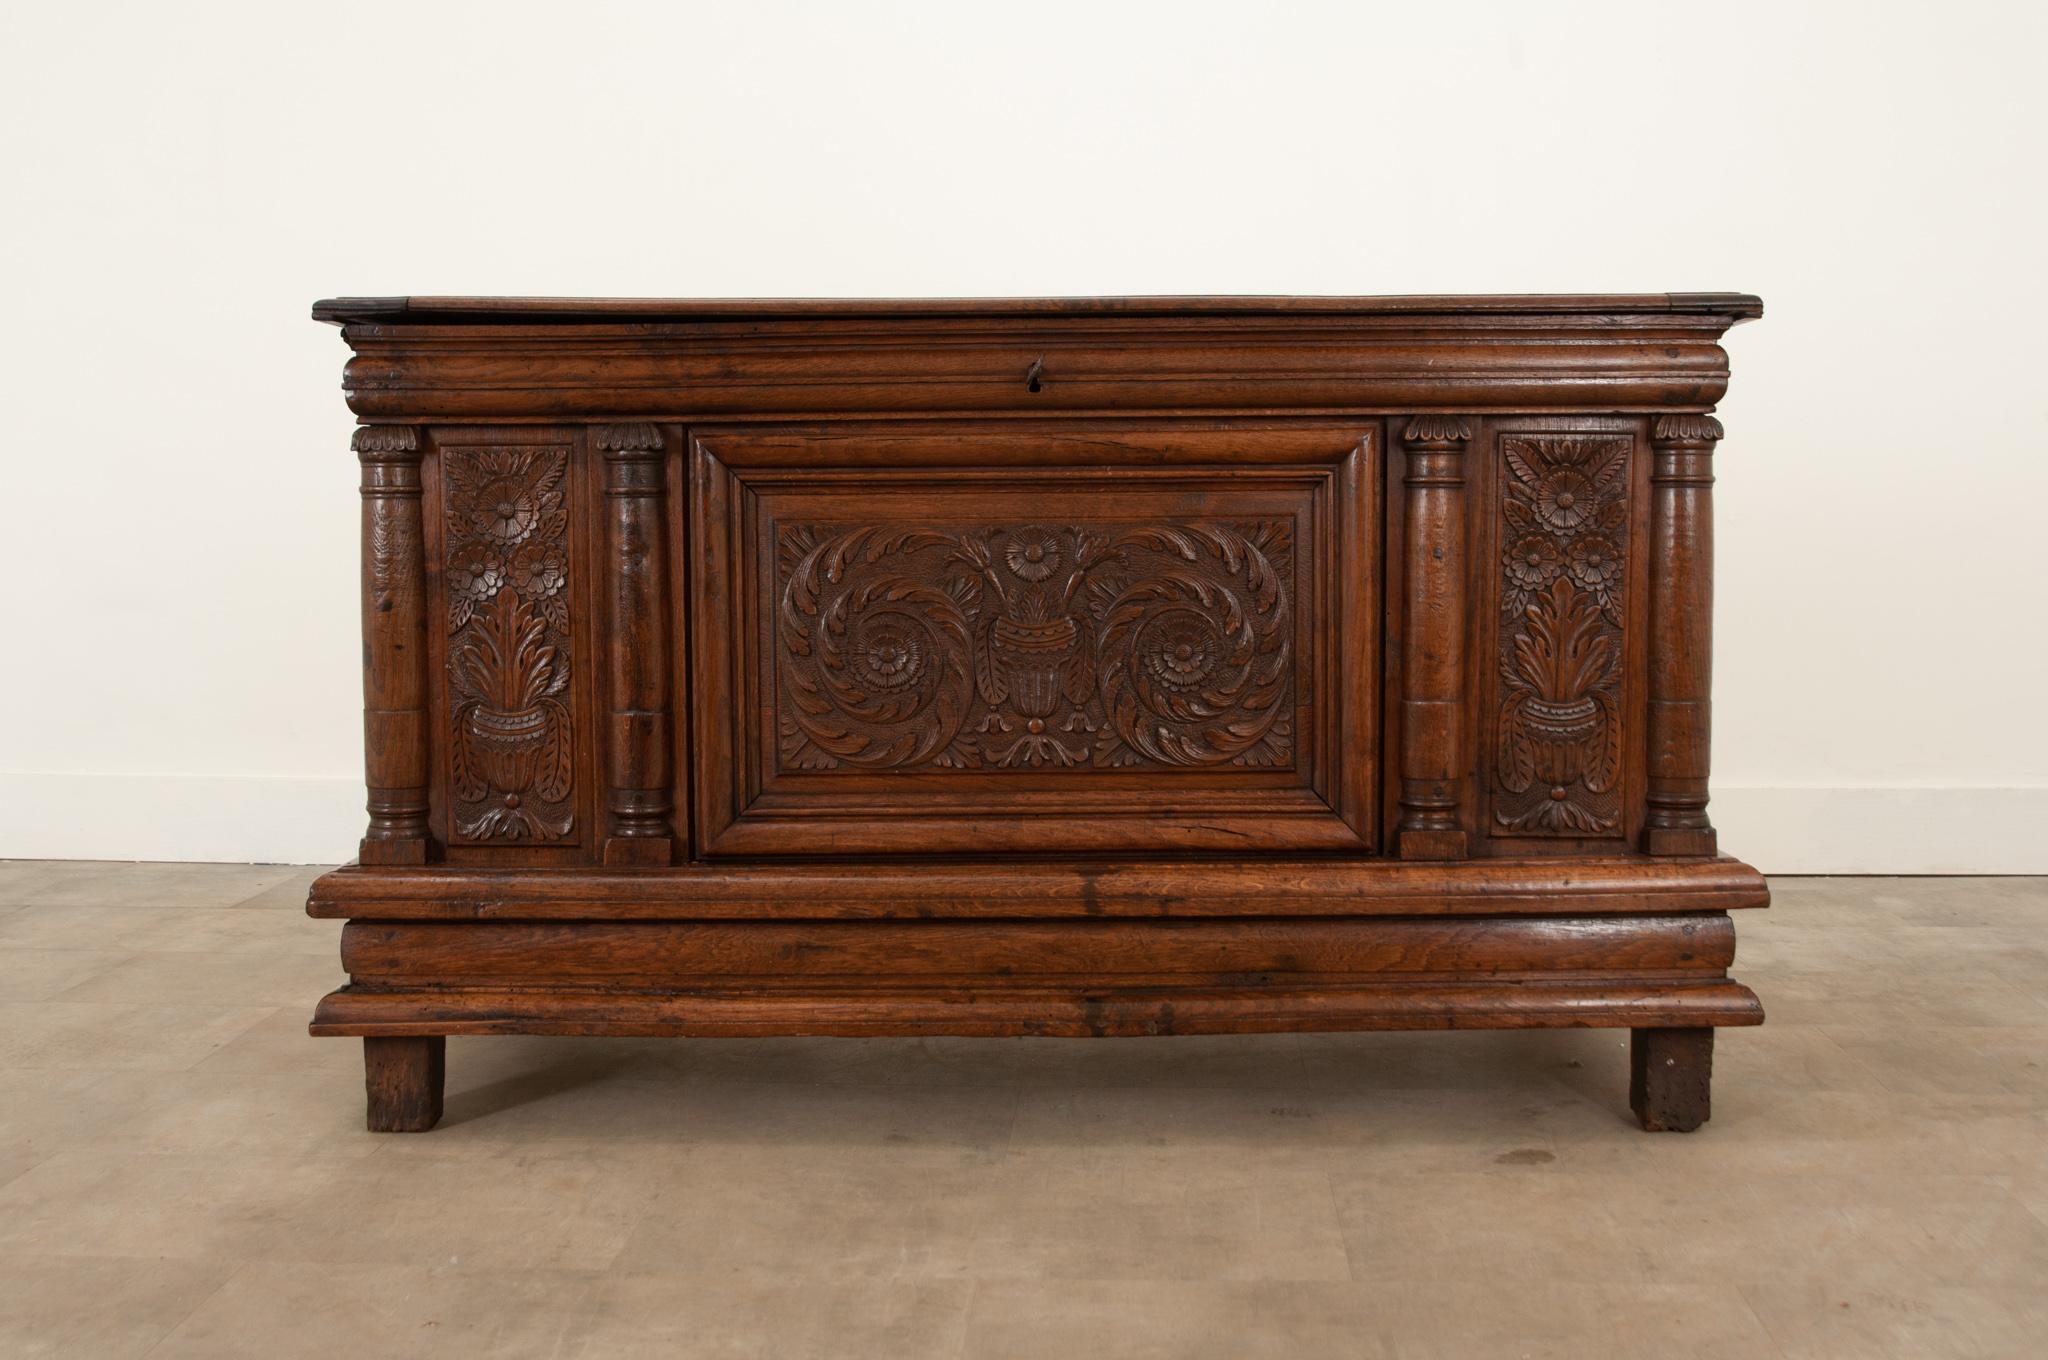 This solid oak coffer from the 1720s is full of gorgeous hand carved details and a wonderful patina. Swirling acanthus leaves and florals beautifully adorn the facade. Four columns break up the front motif. A small candle box with a hinging top is